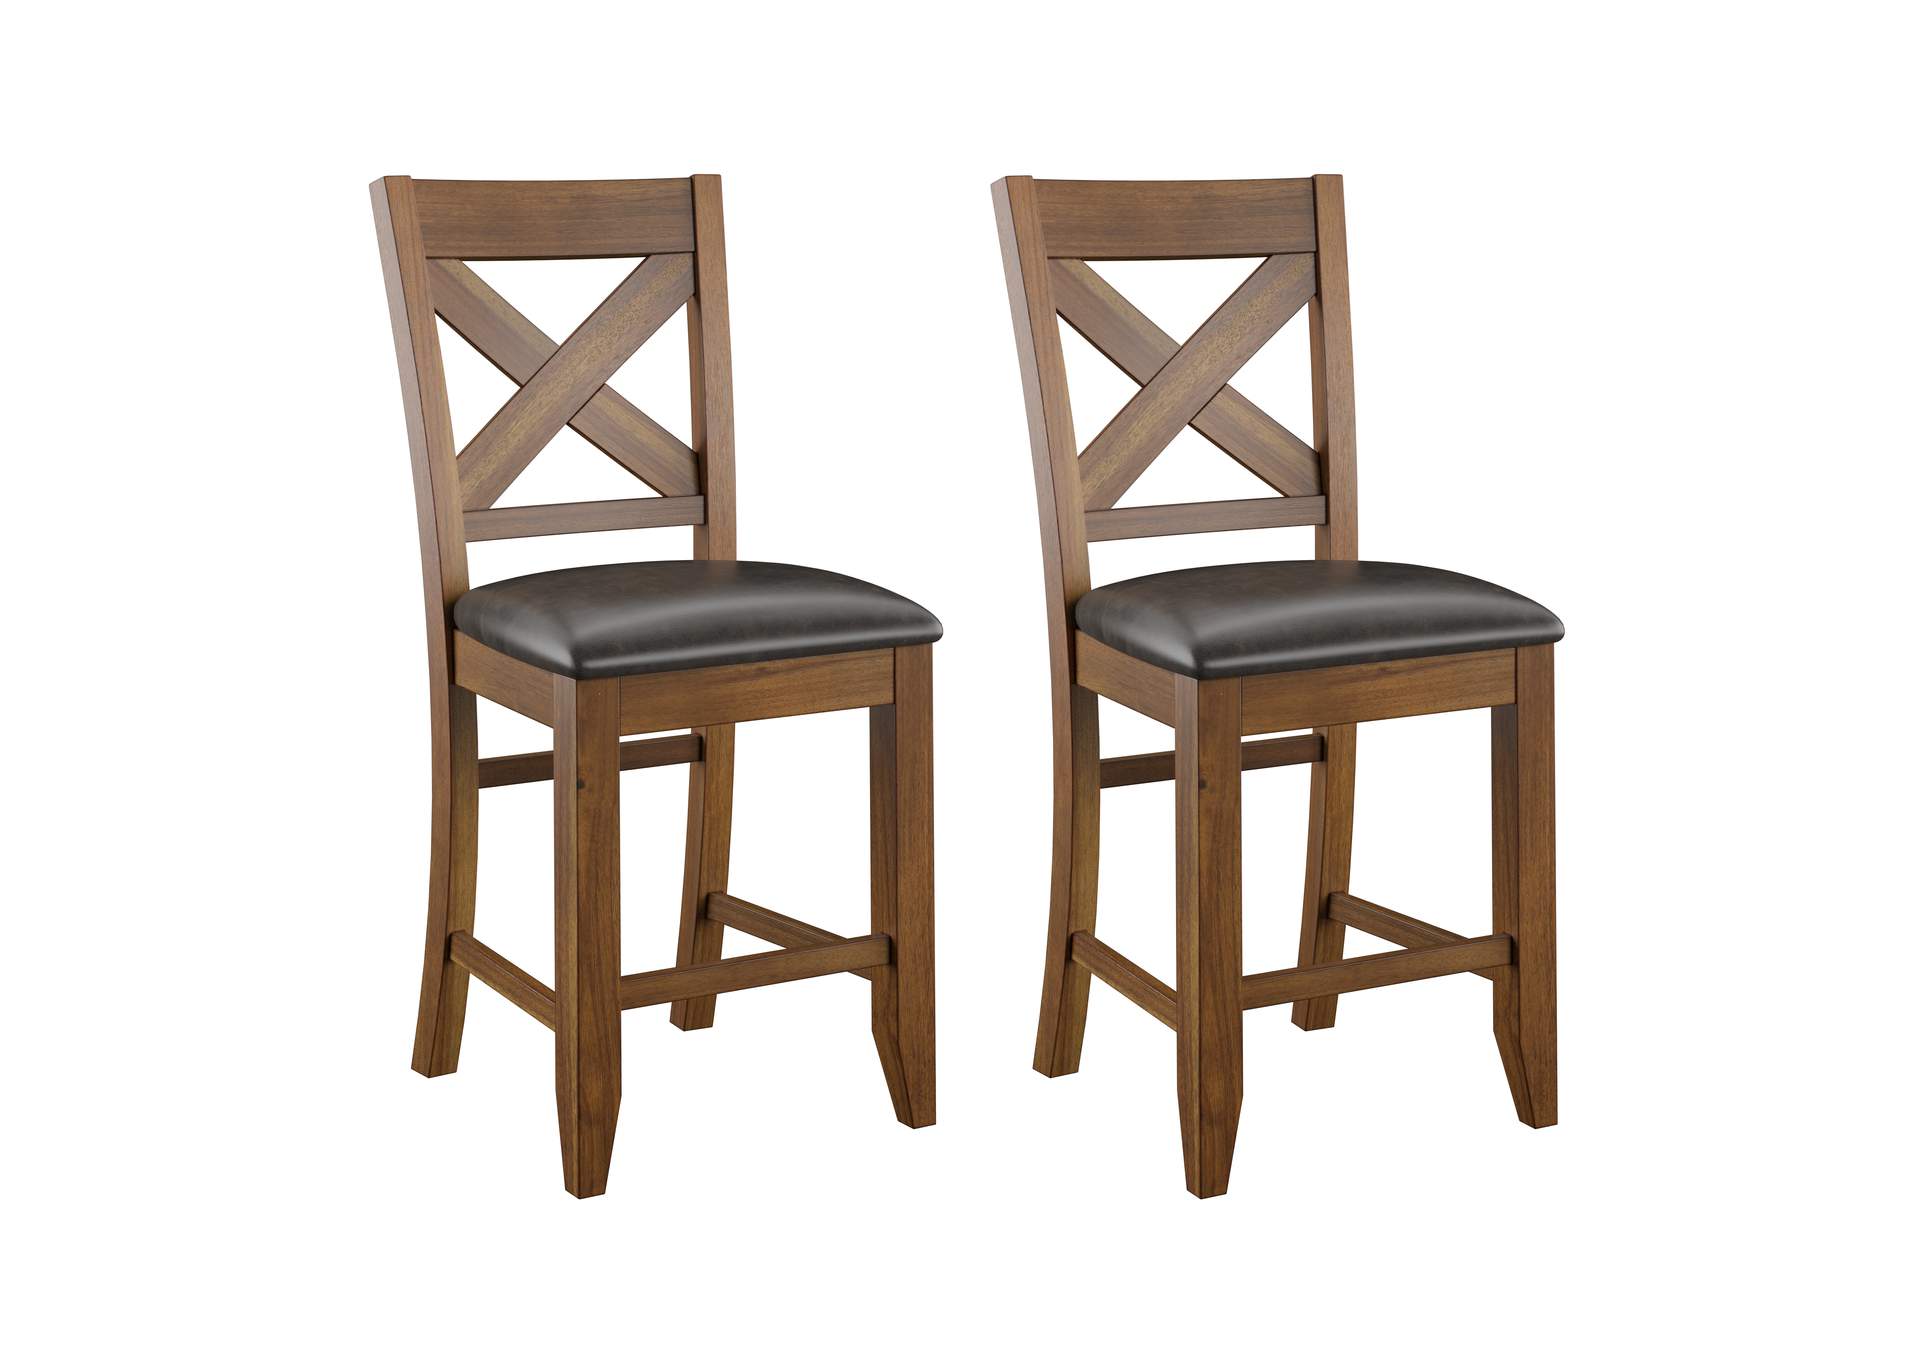 Darby Upholstered Barstool,Emerald Home Furnishings